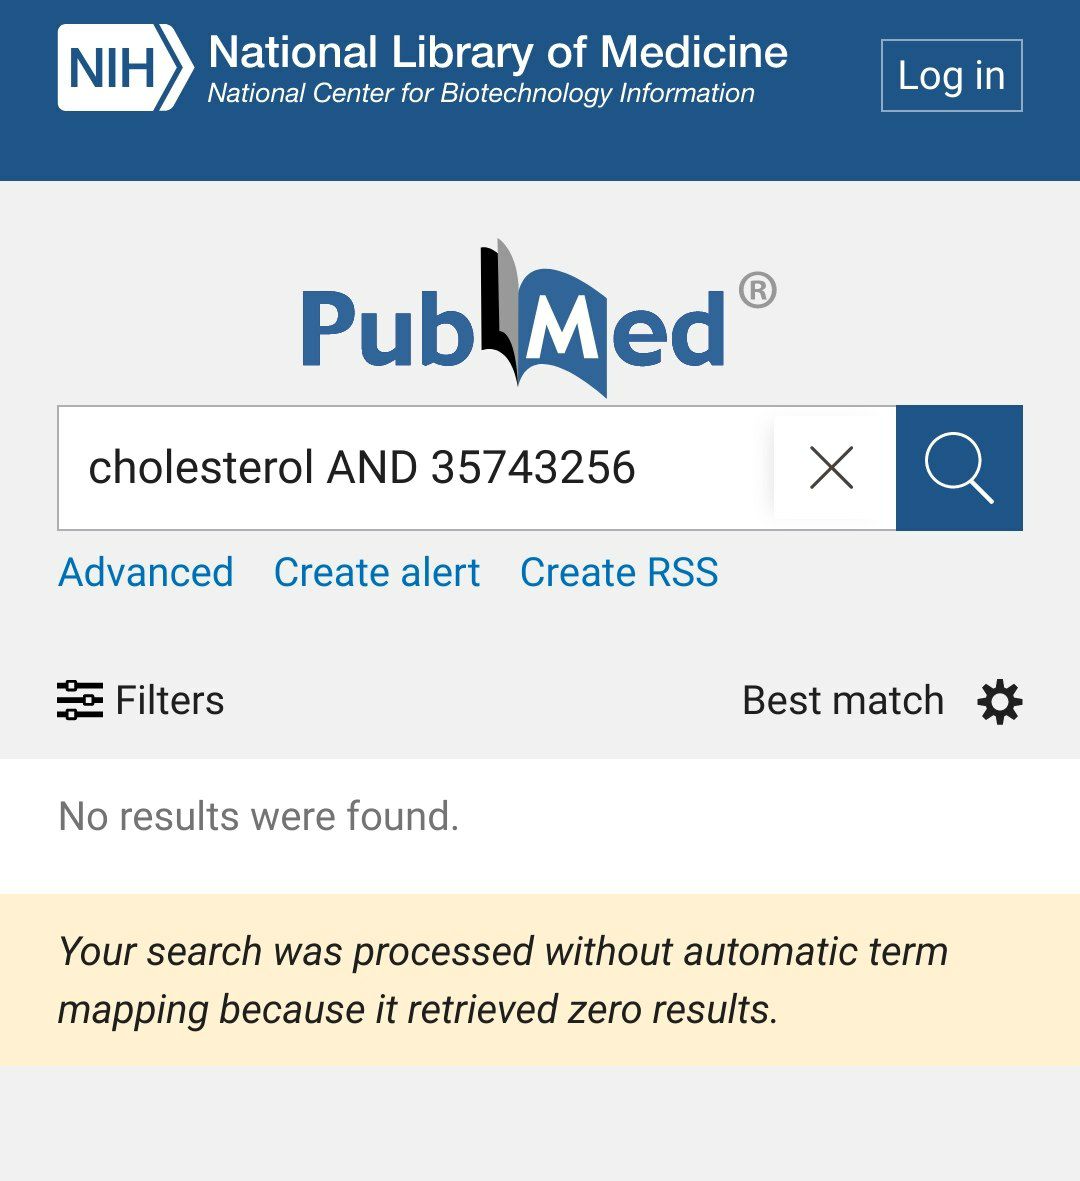 Does PubMed search full-text? 📑